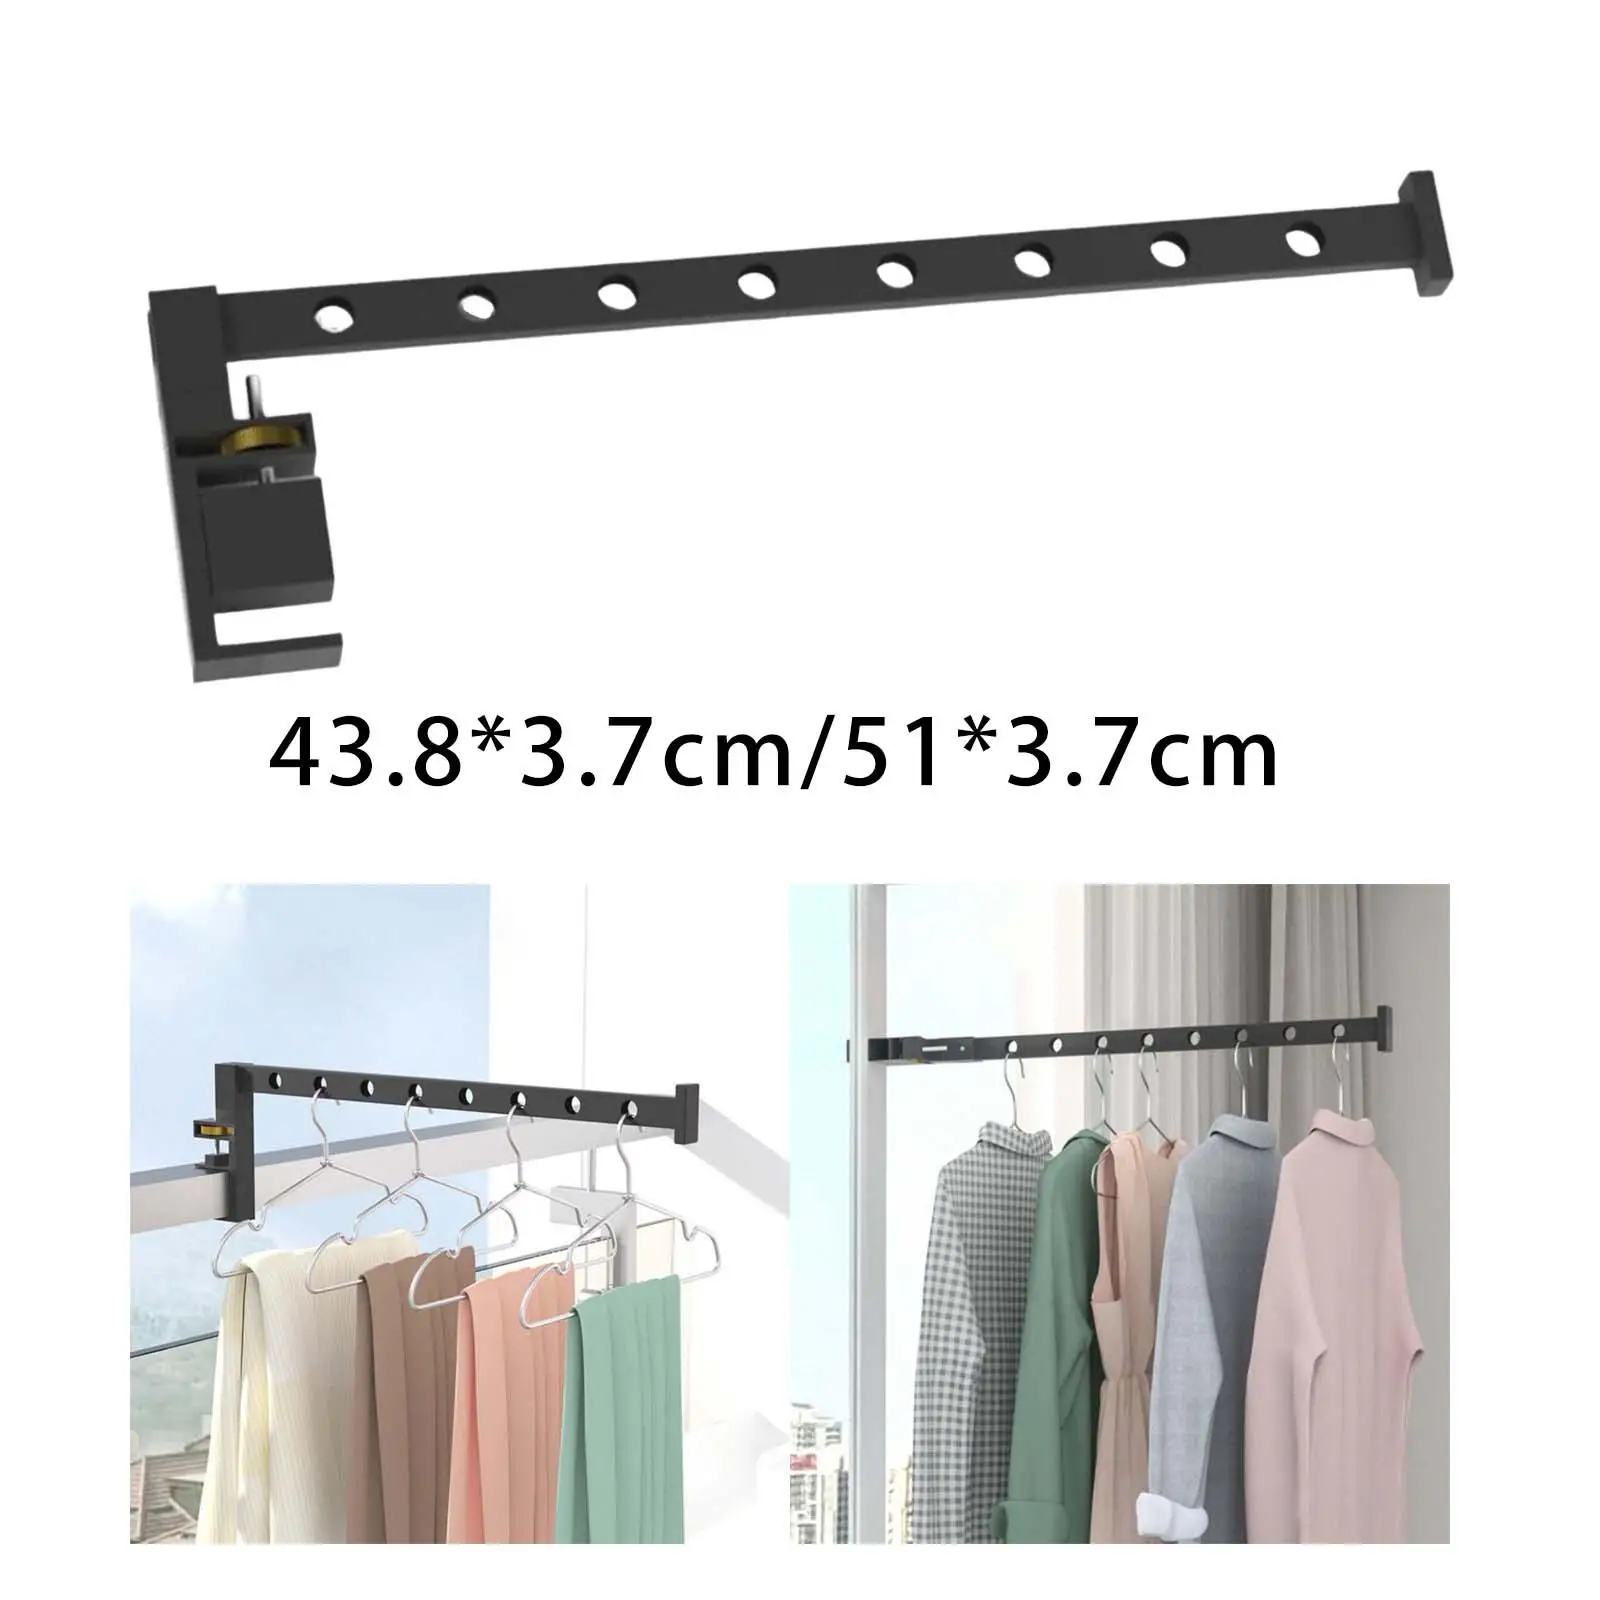 Drying Clothes Folding Clothes Hanger Collapsible Wall Mounted Clothes Hanger for Window Balcony Bedroom Kids Clothes Jackets